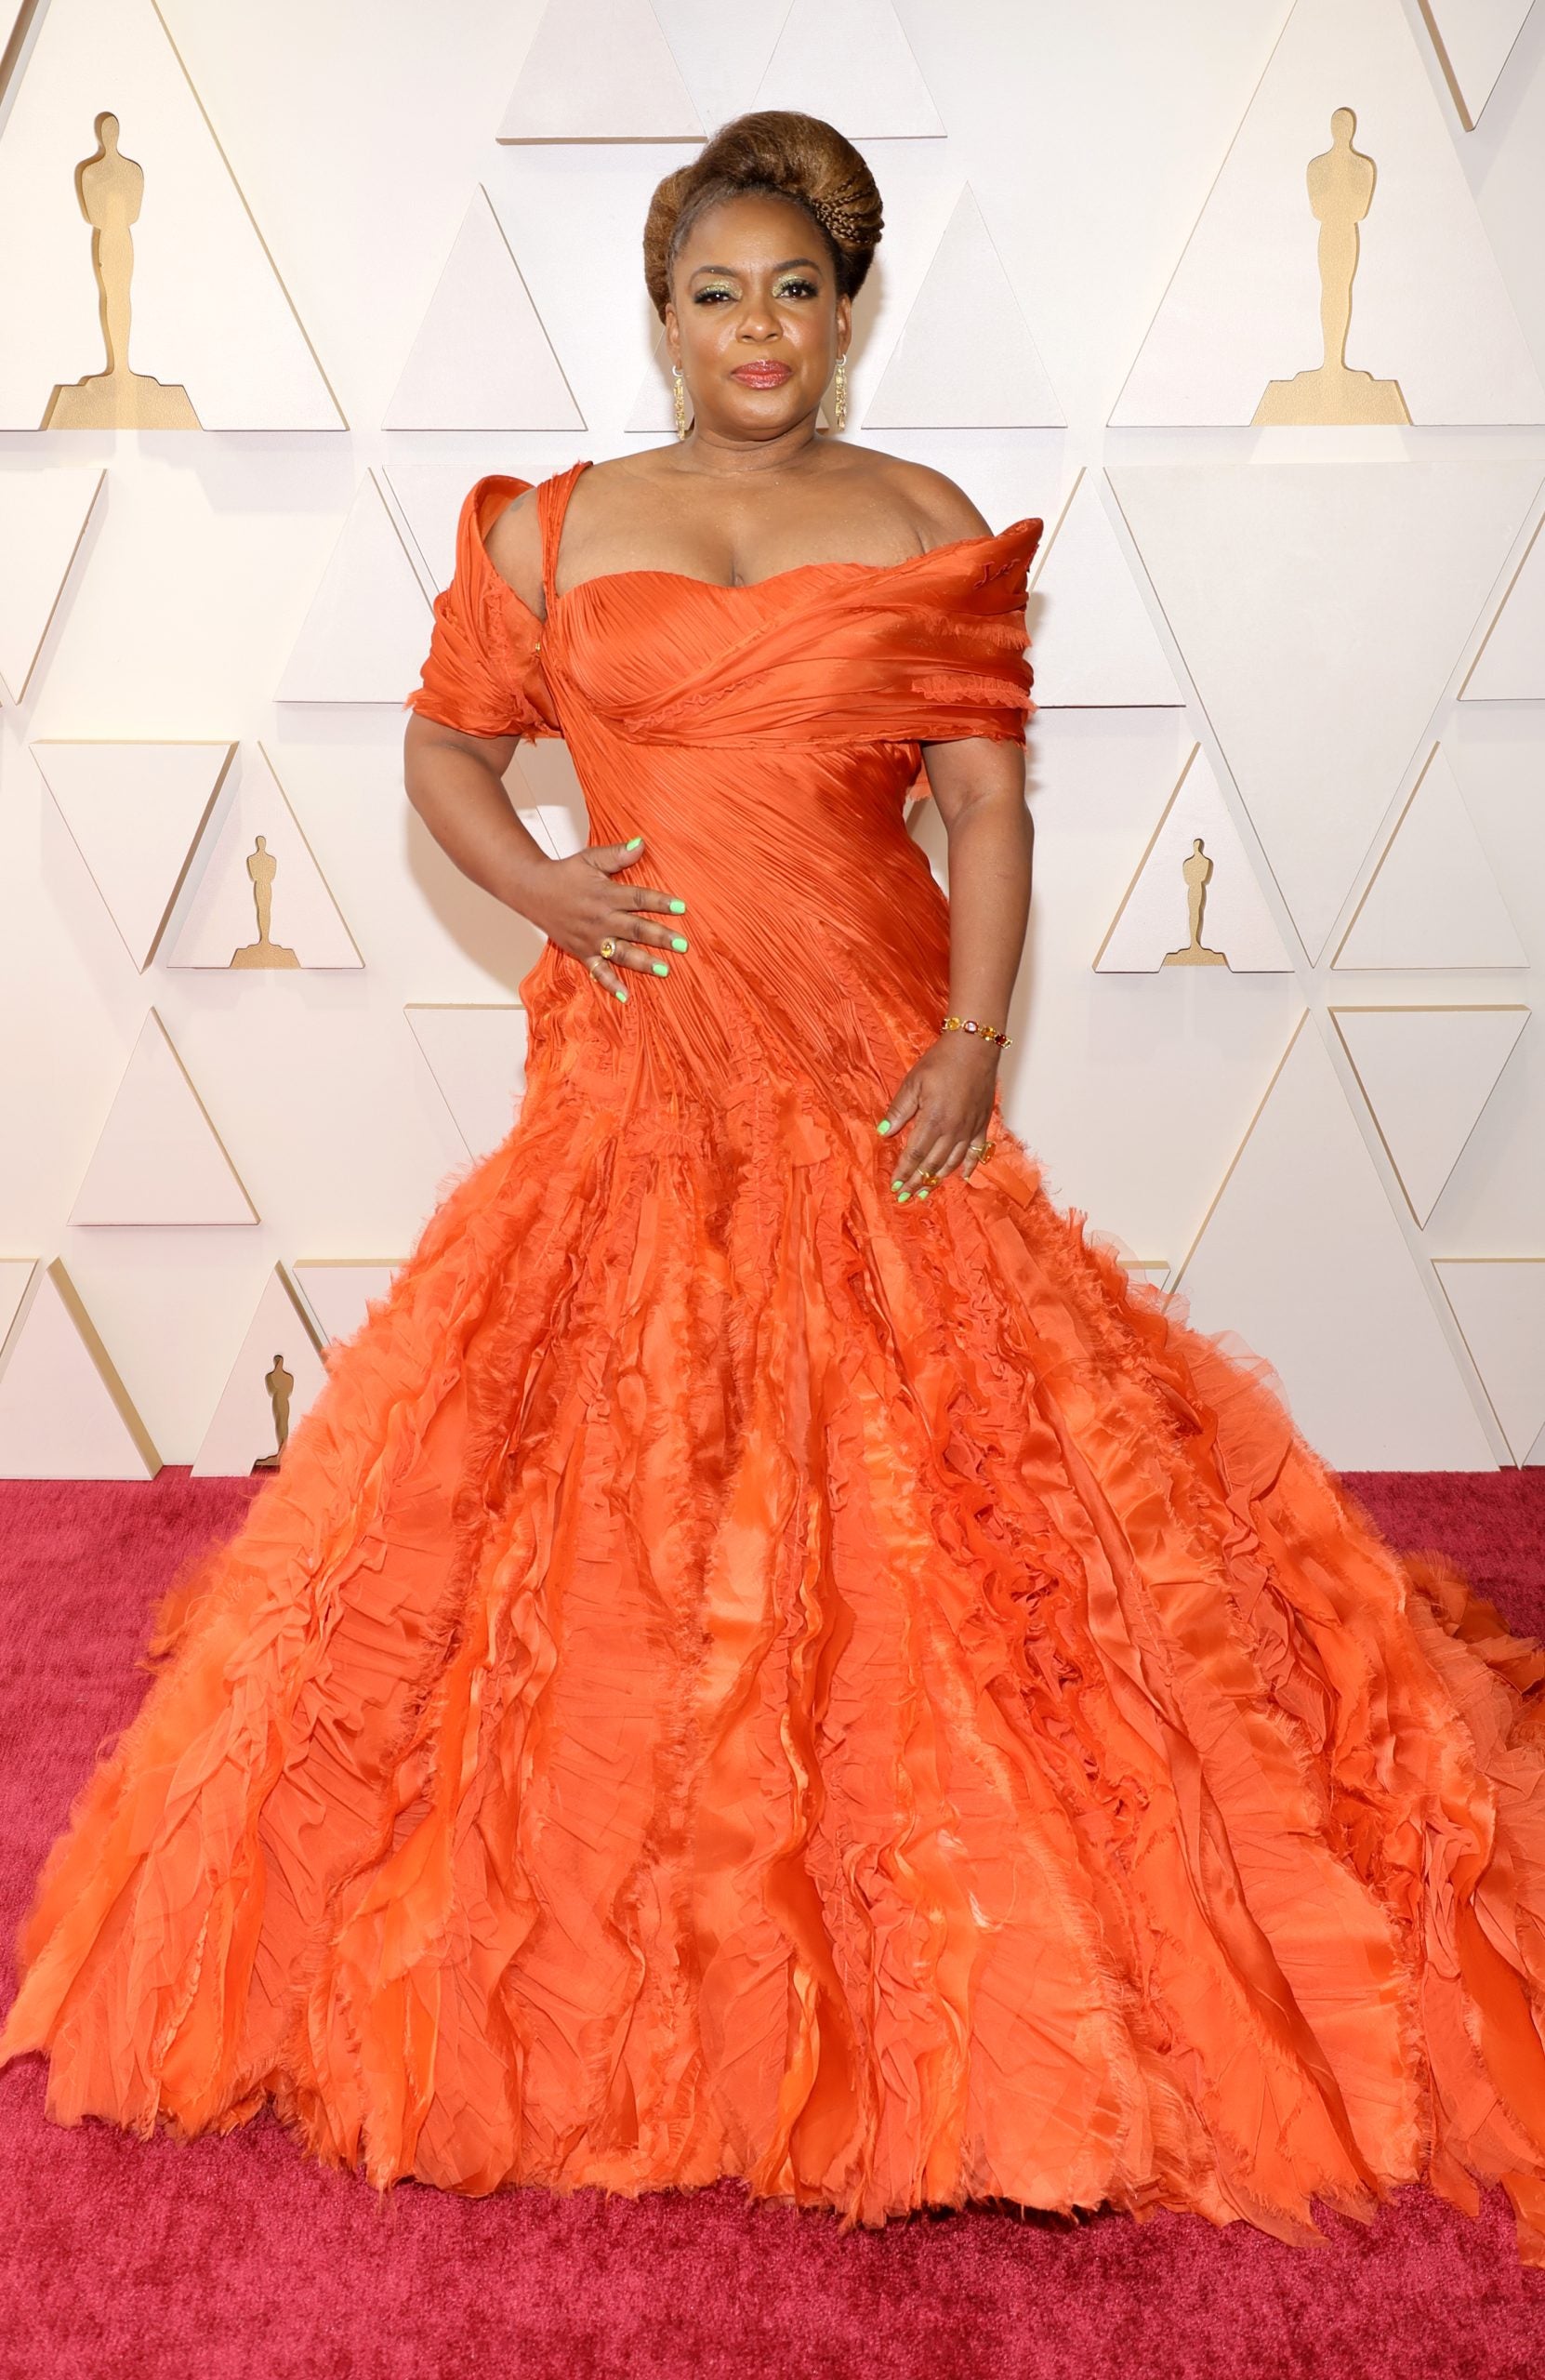 Black Hollywood Lit Up The Red Carpet At The 2022 Academy Awards